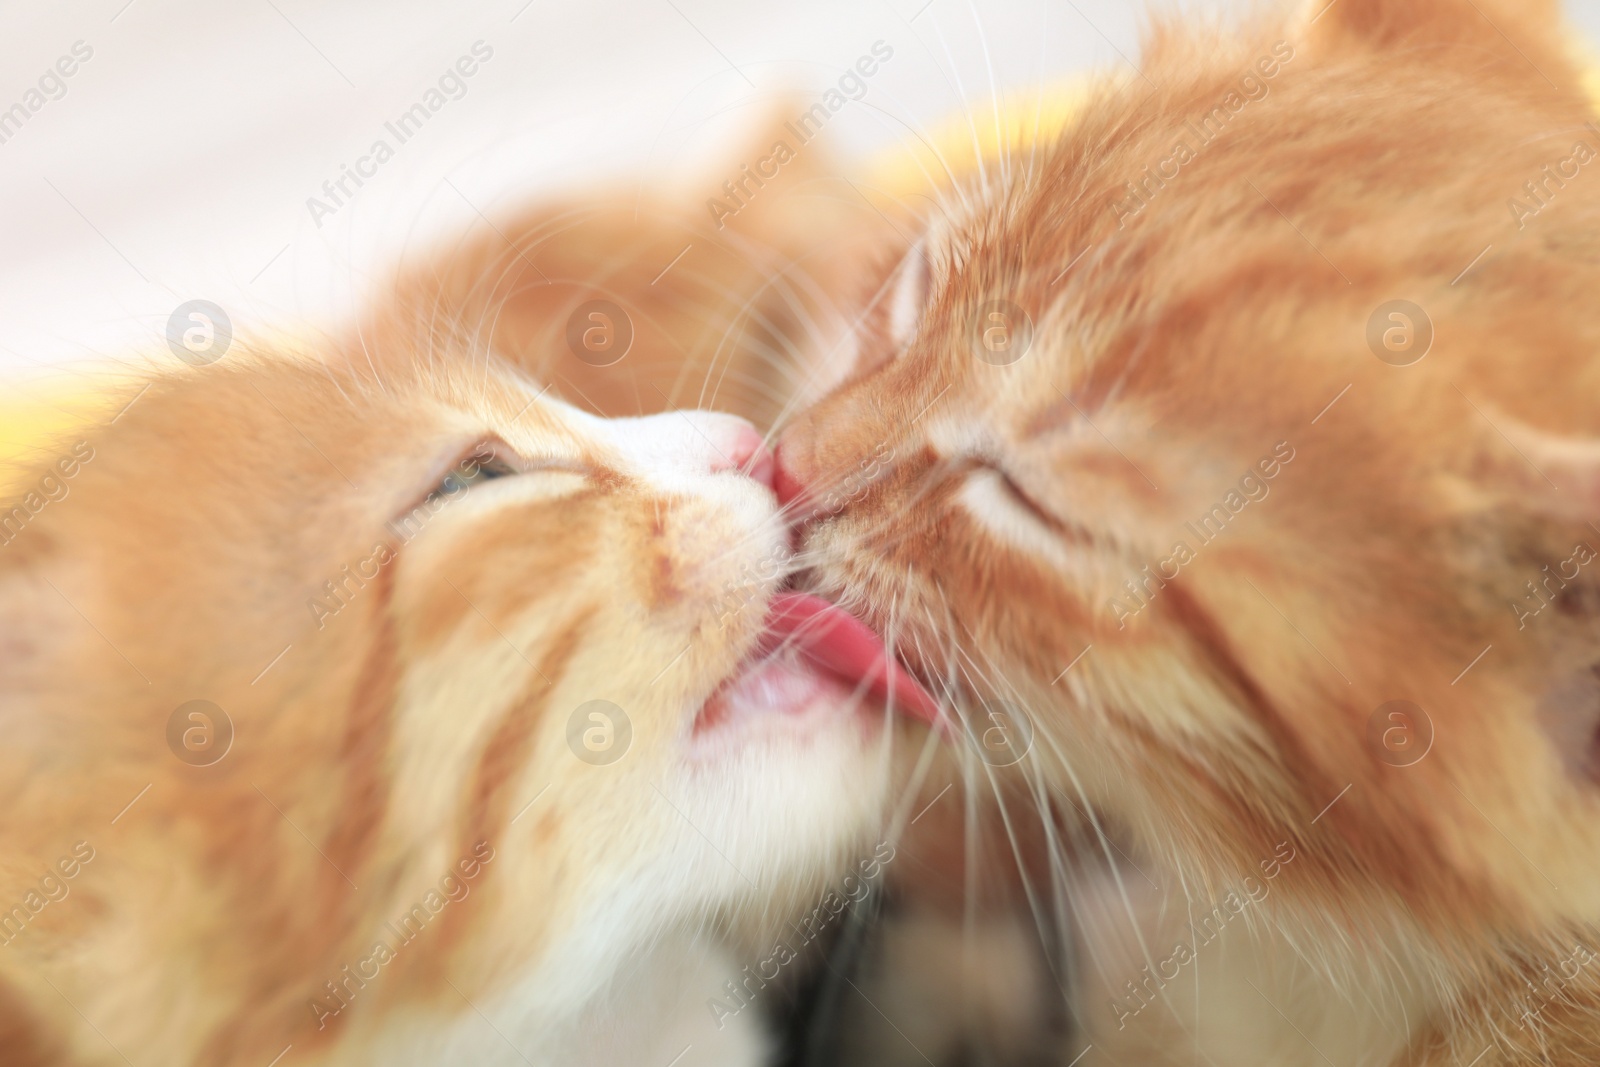 Photo of Cute little red kittens licking each other on blurred background, closeup view